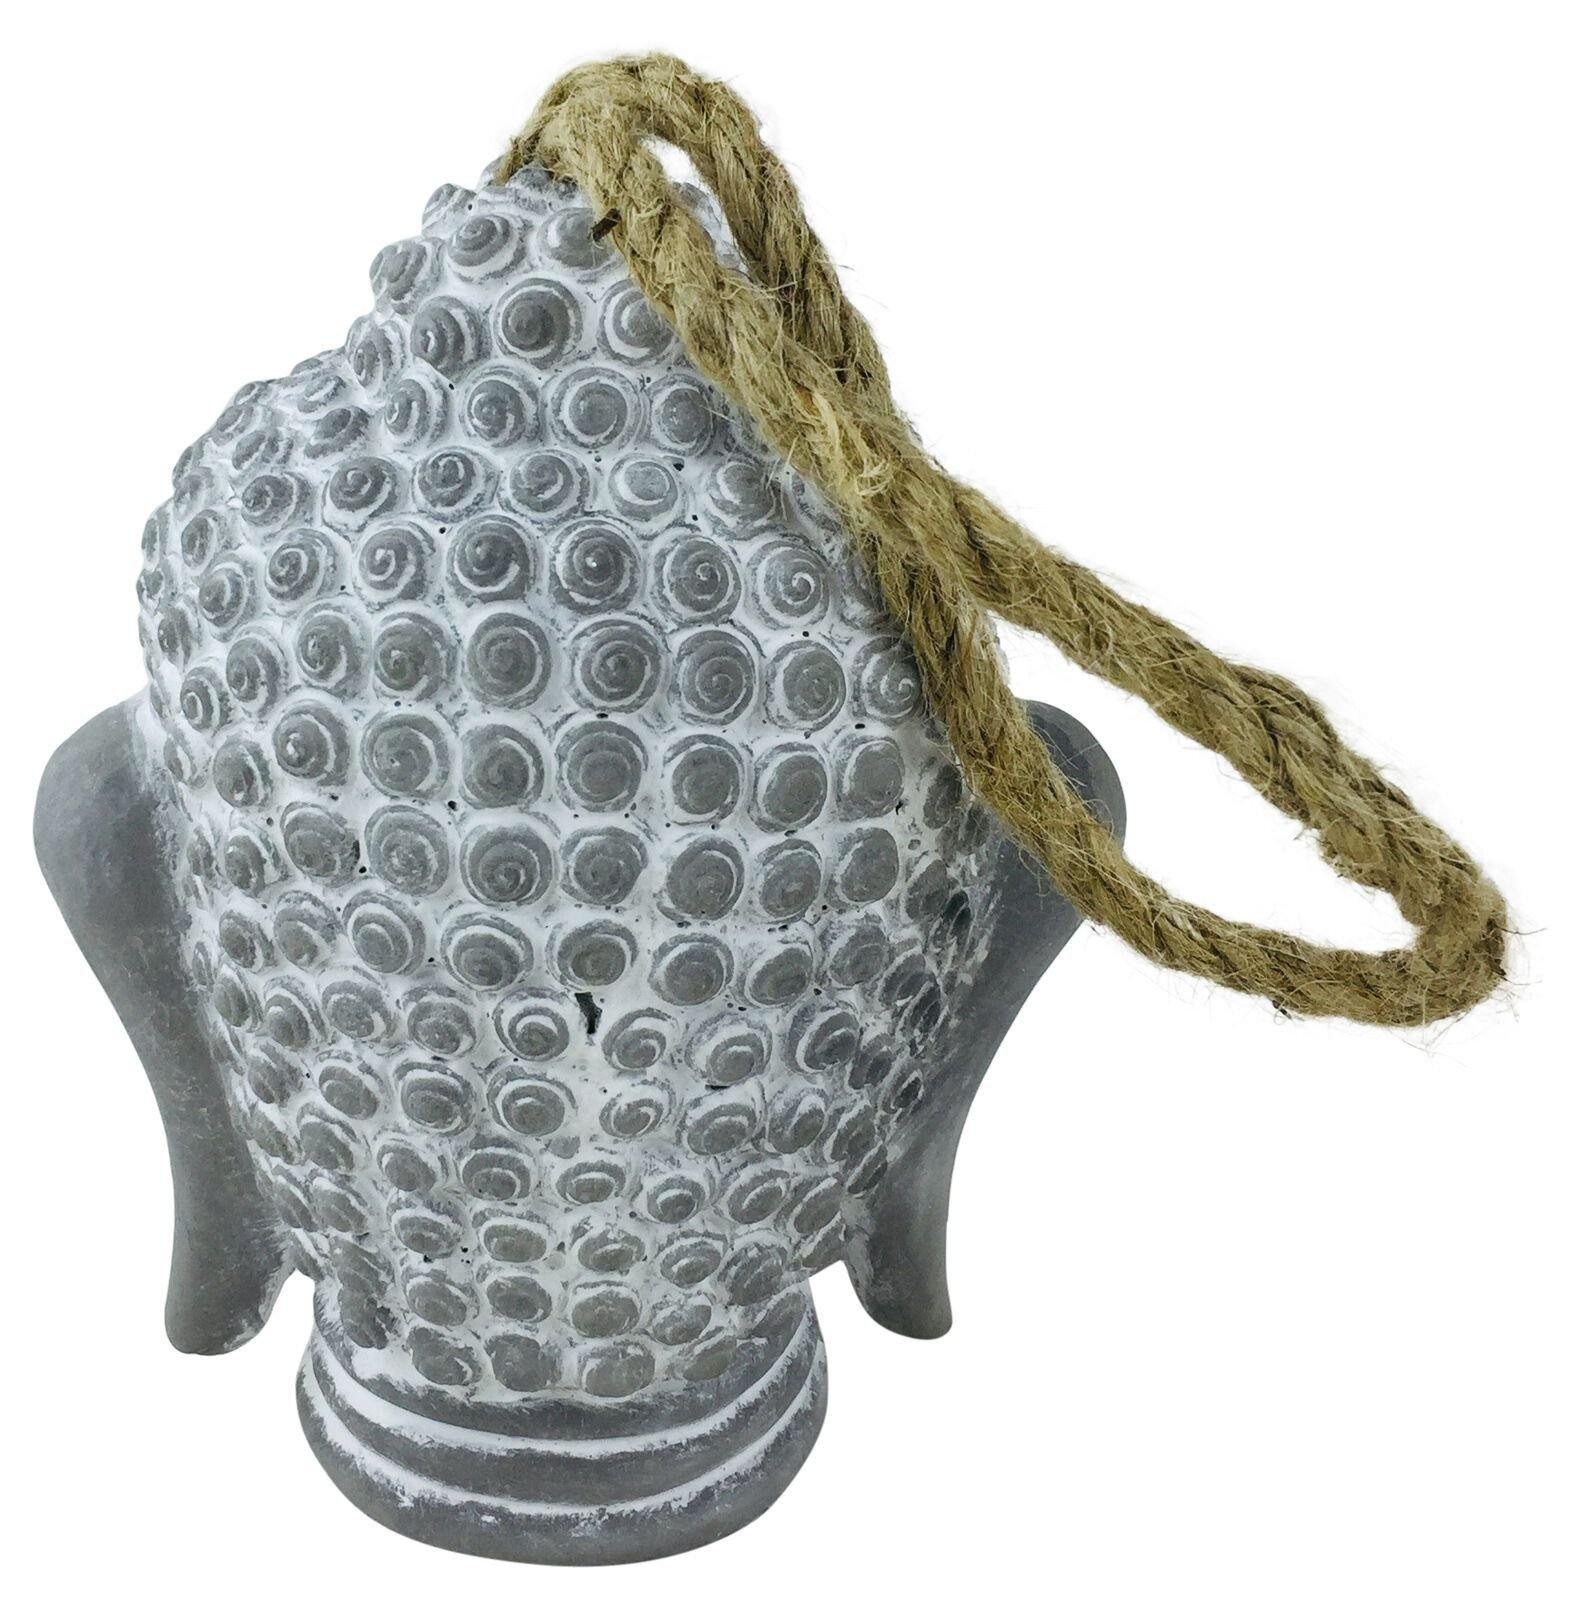 Grey Buddha Head Door Stop Stopper Ornament 18cm - Home Inspired Gifts